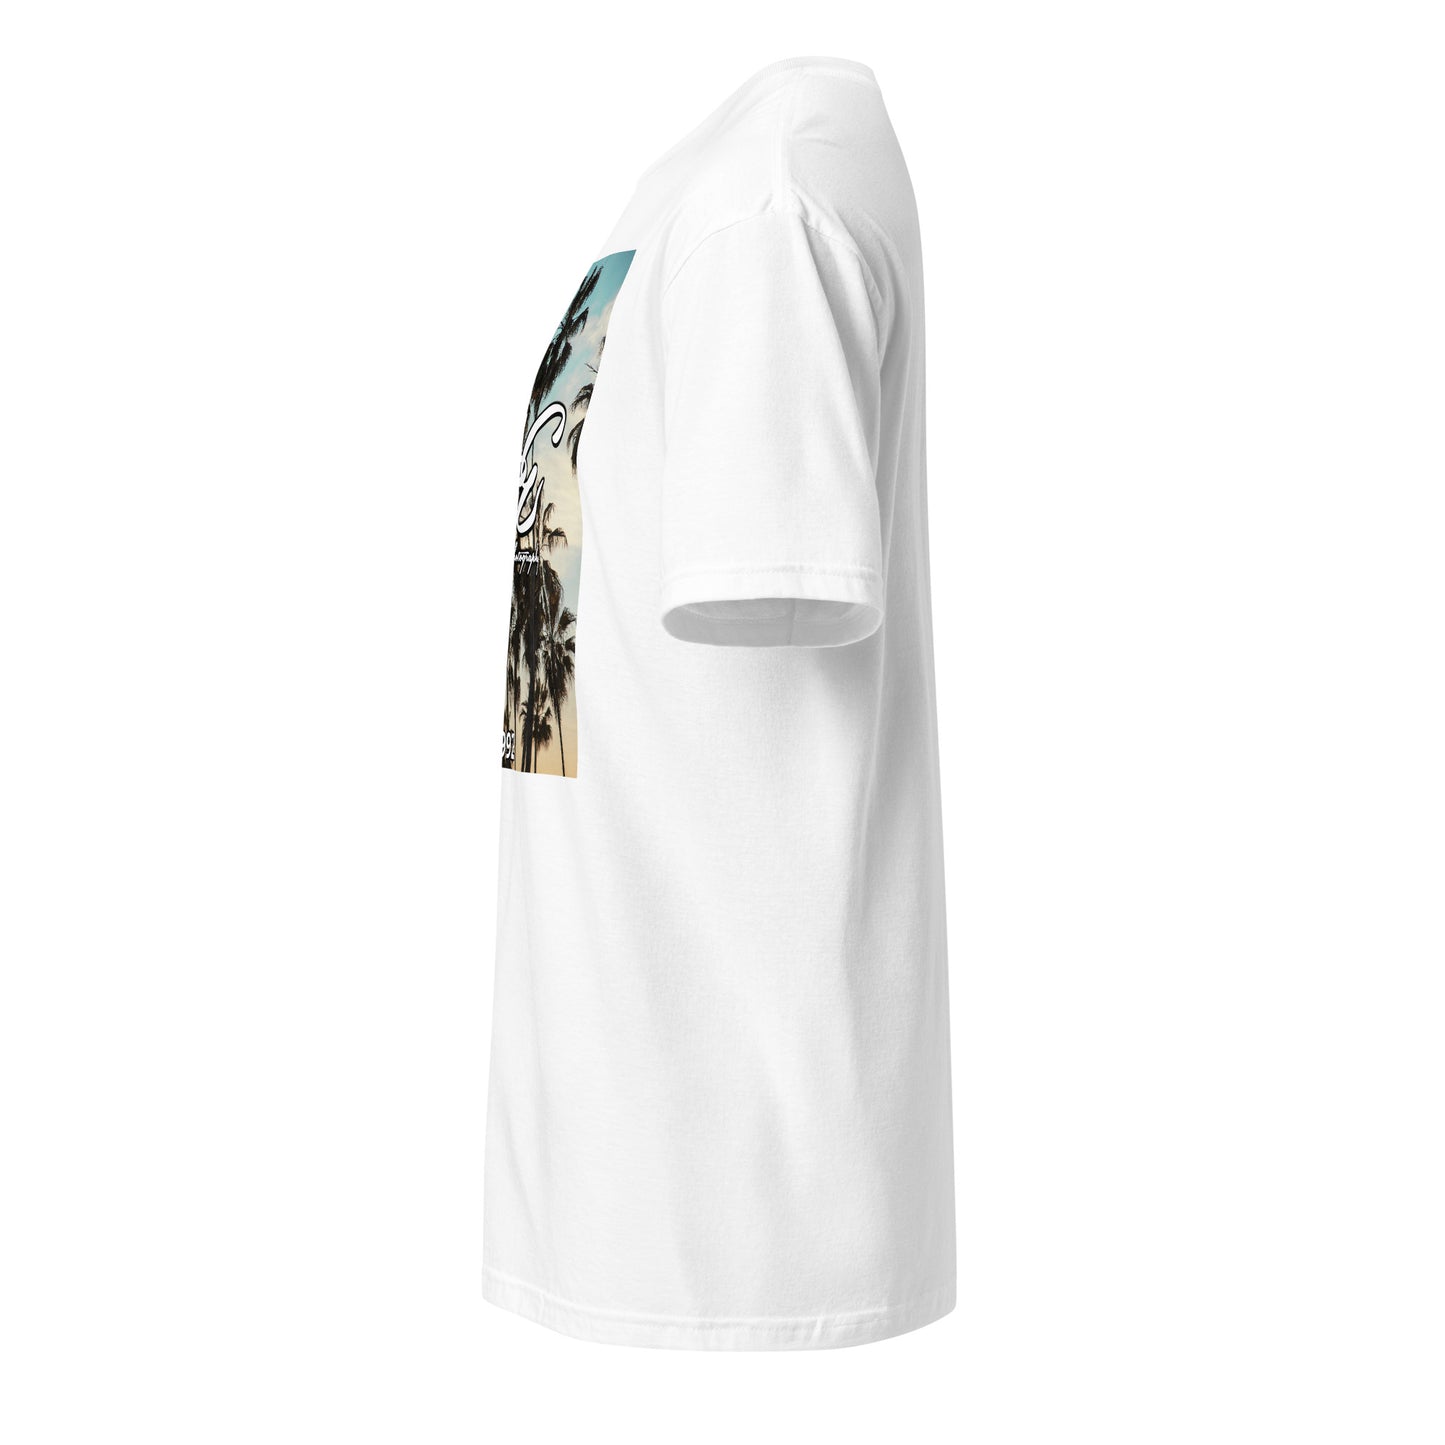 (New) KGE Photography - Paradise Palms - Softstyle Tee